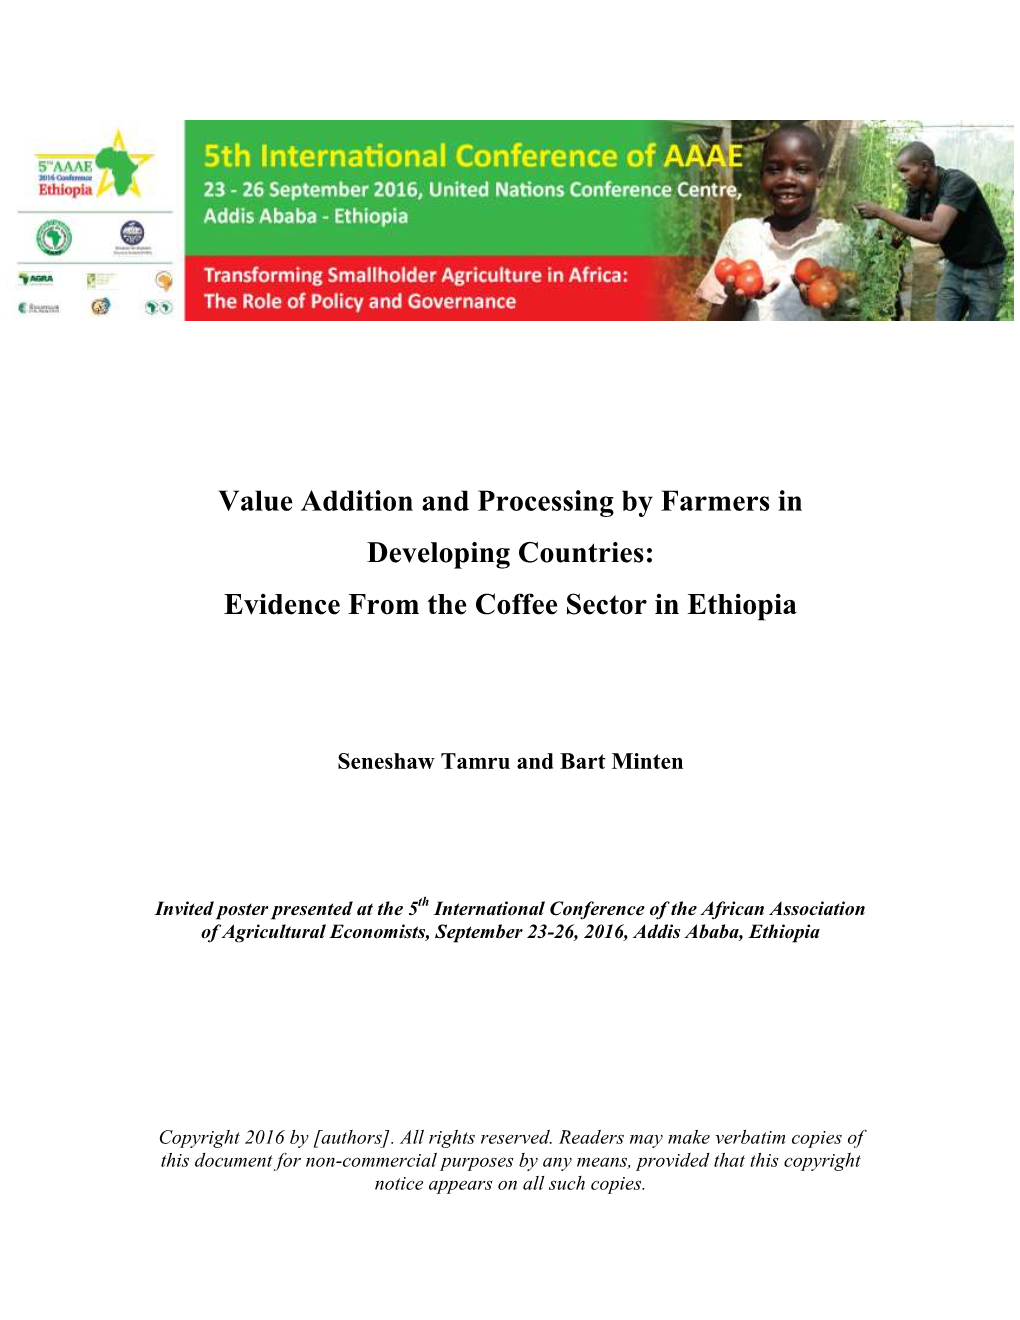 Value Addition and Processing by Farmers in Developing Countries: Evidence from the Coffee Sector in Ethiopia